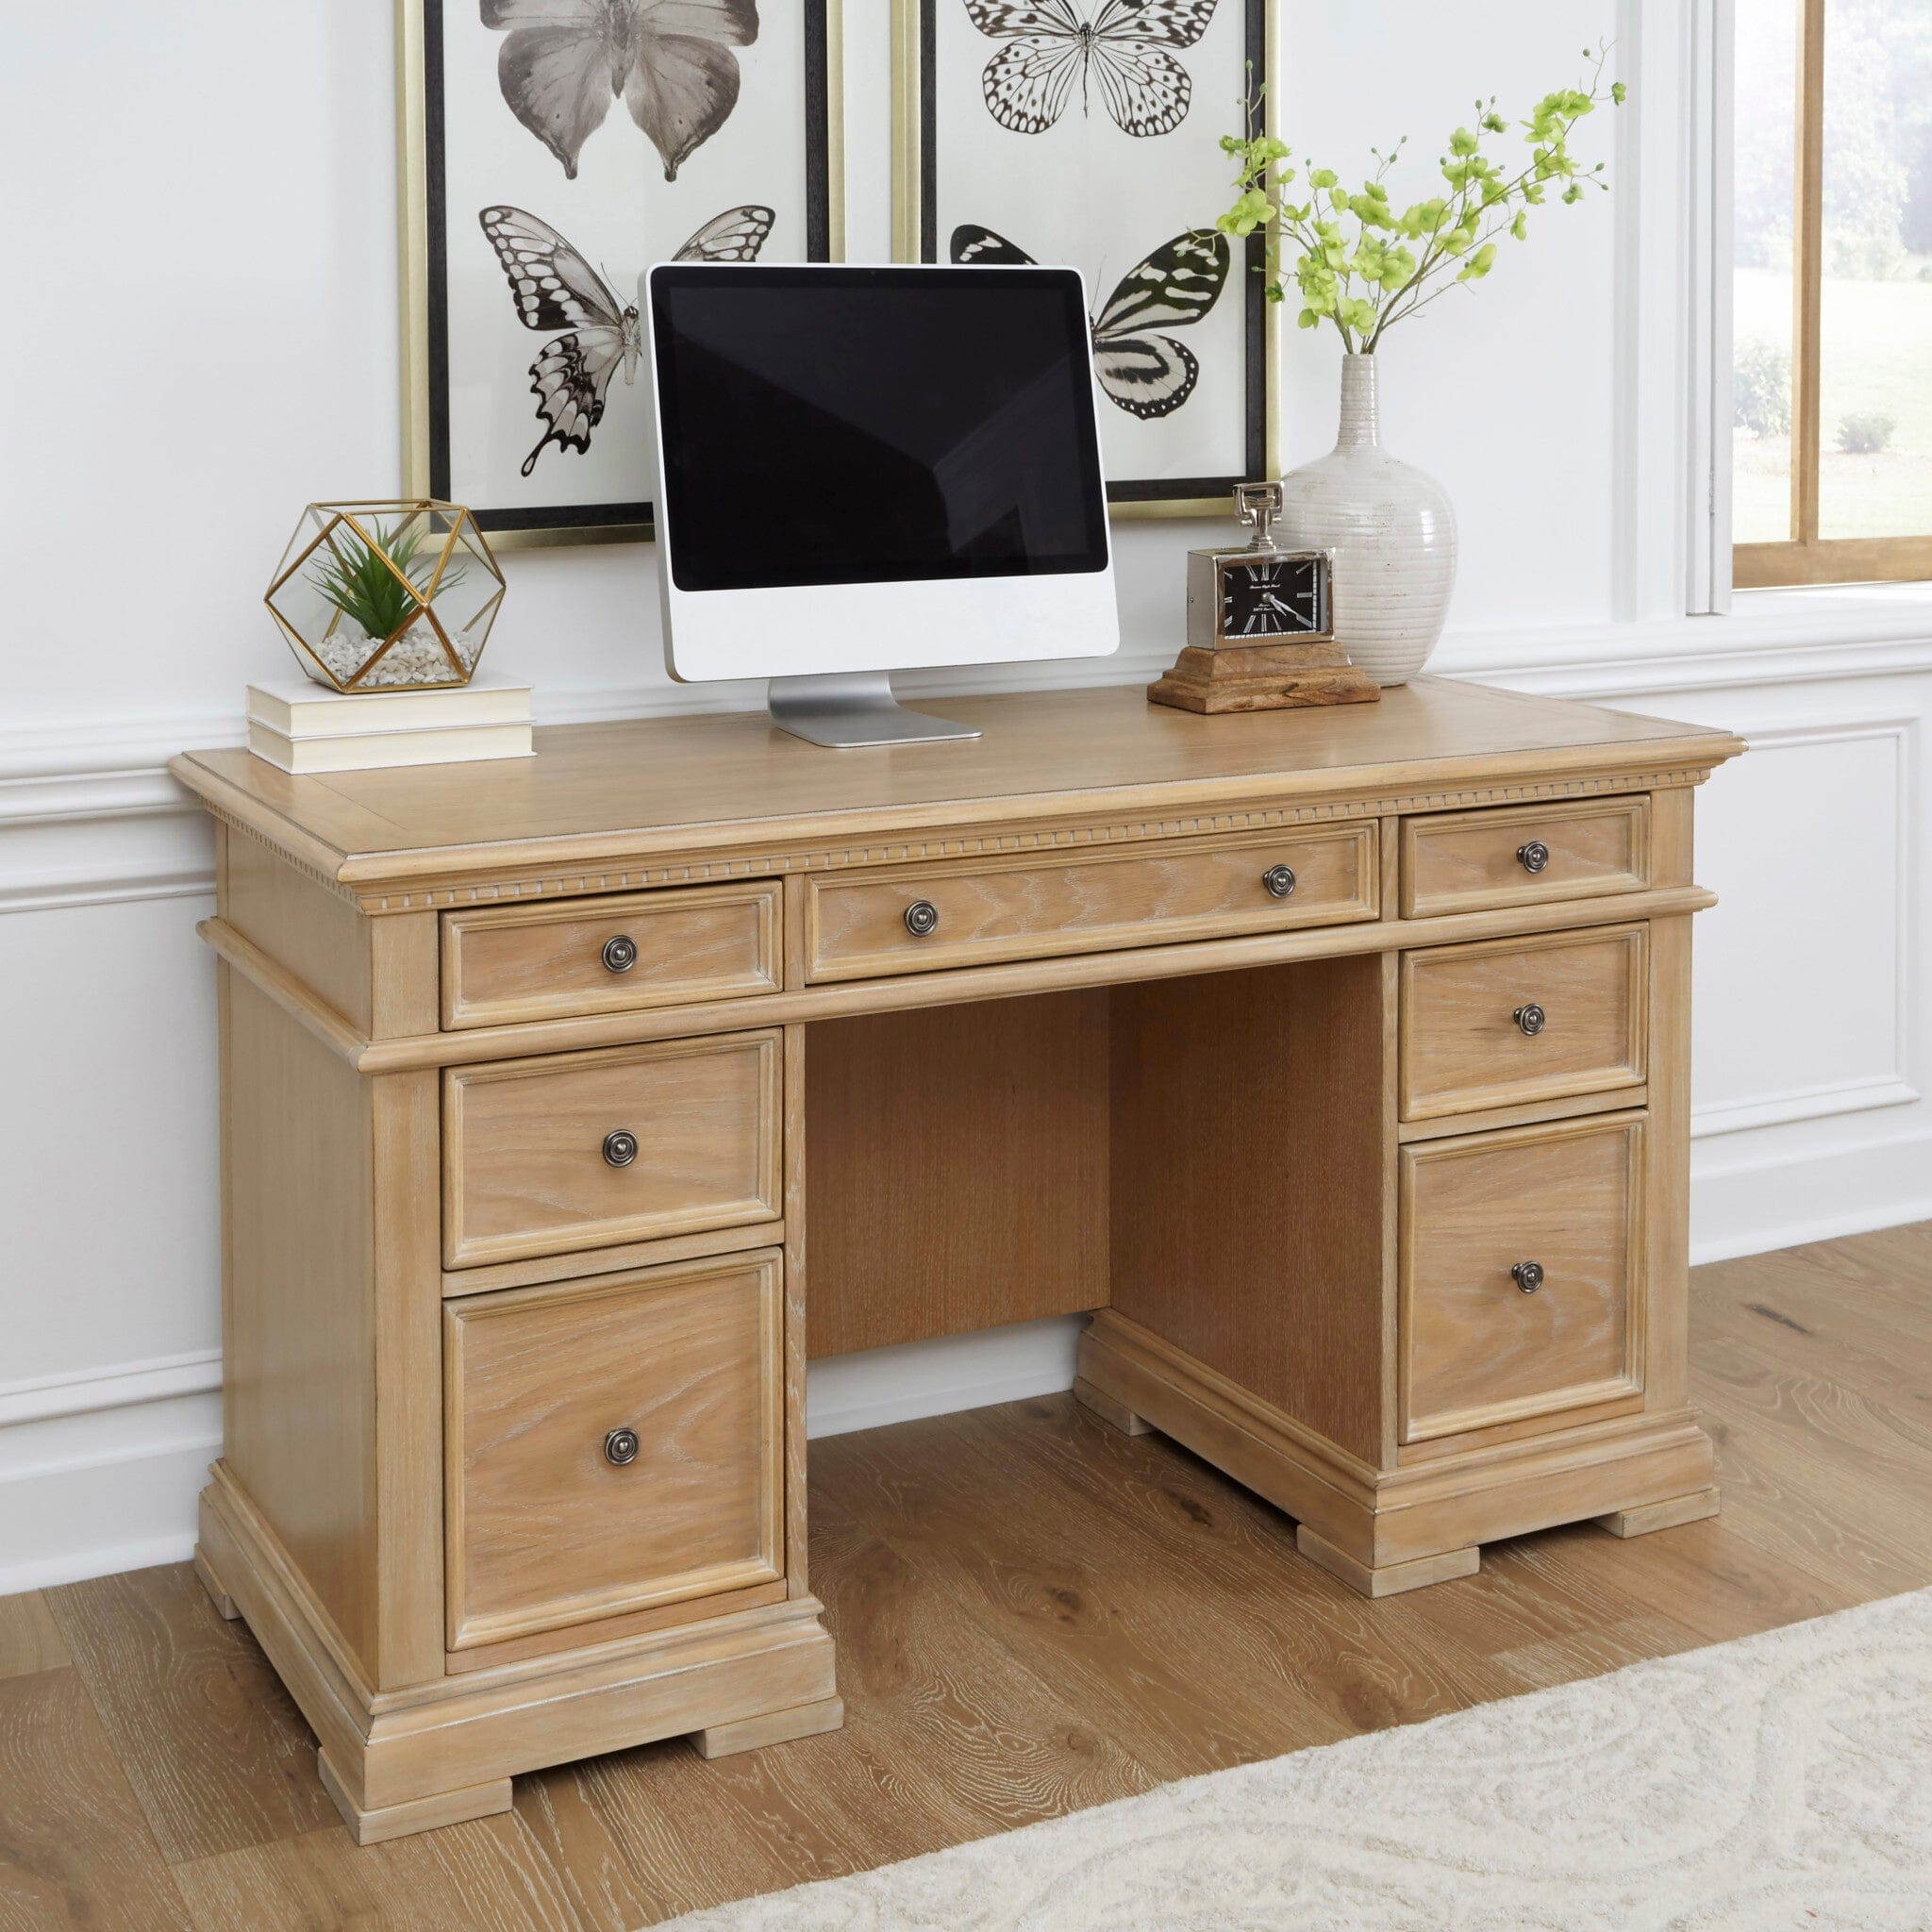 Traditional Pedestal Desk By Manor House Desk Manor House